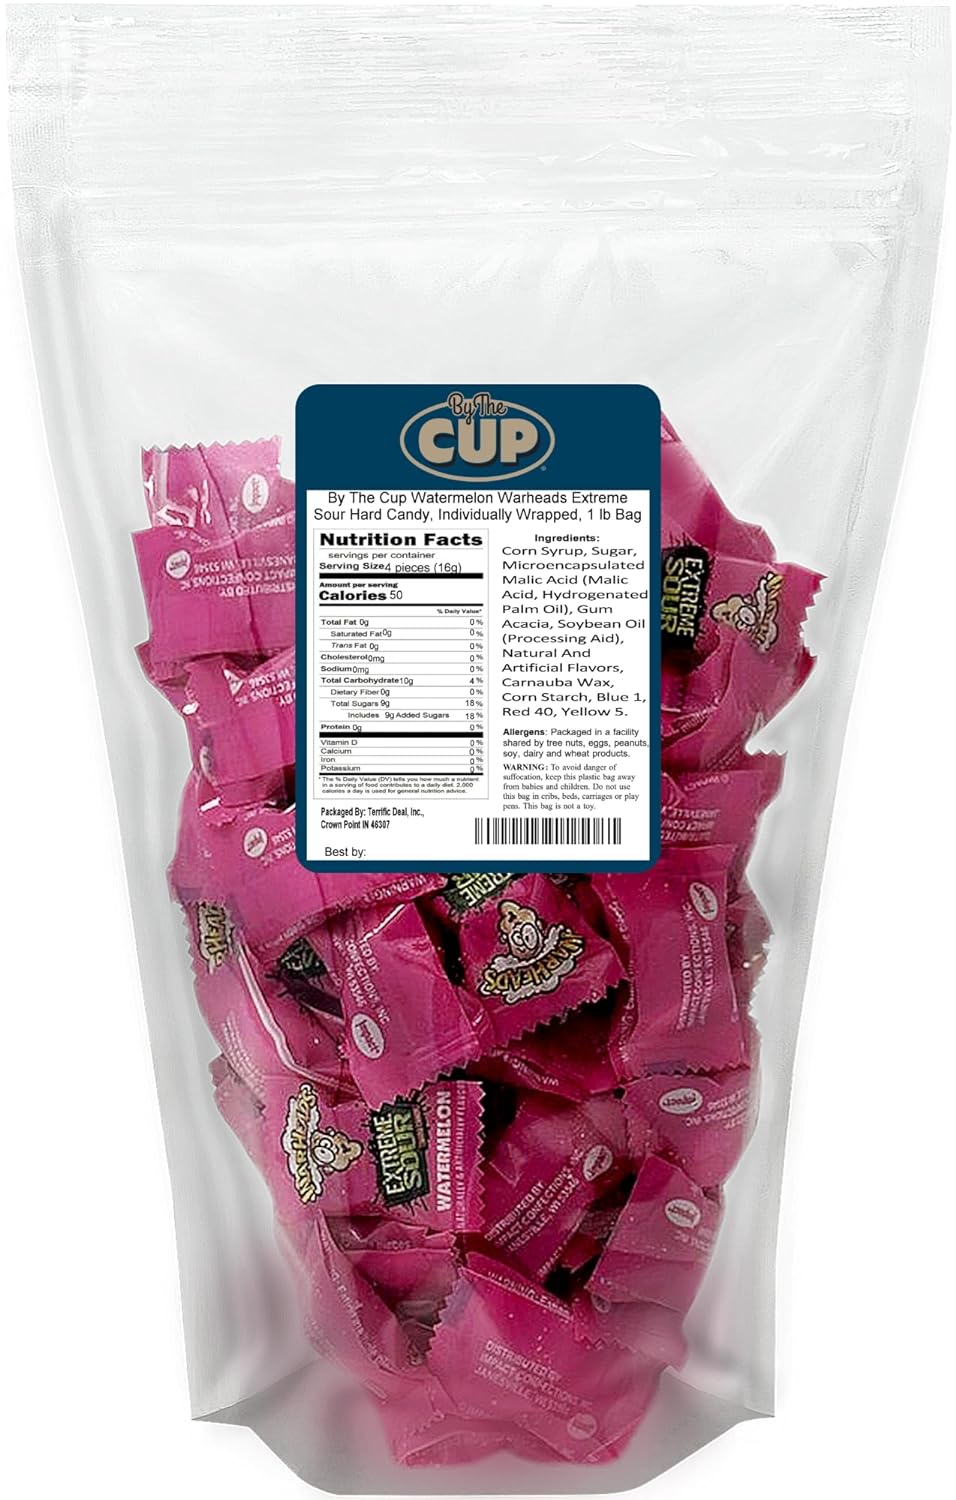 By The Cup Watermelon Warheads Extreme Sour Hard Candy, Individually Wrapped, 1 lb Bag